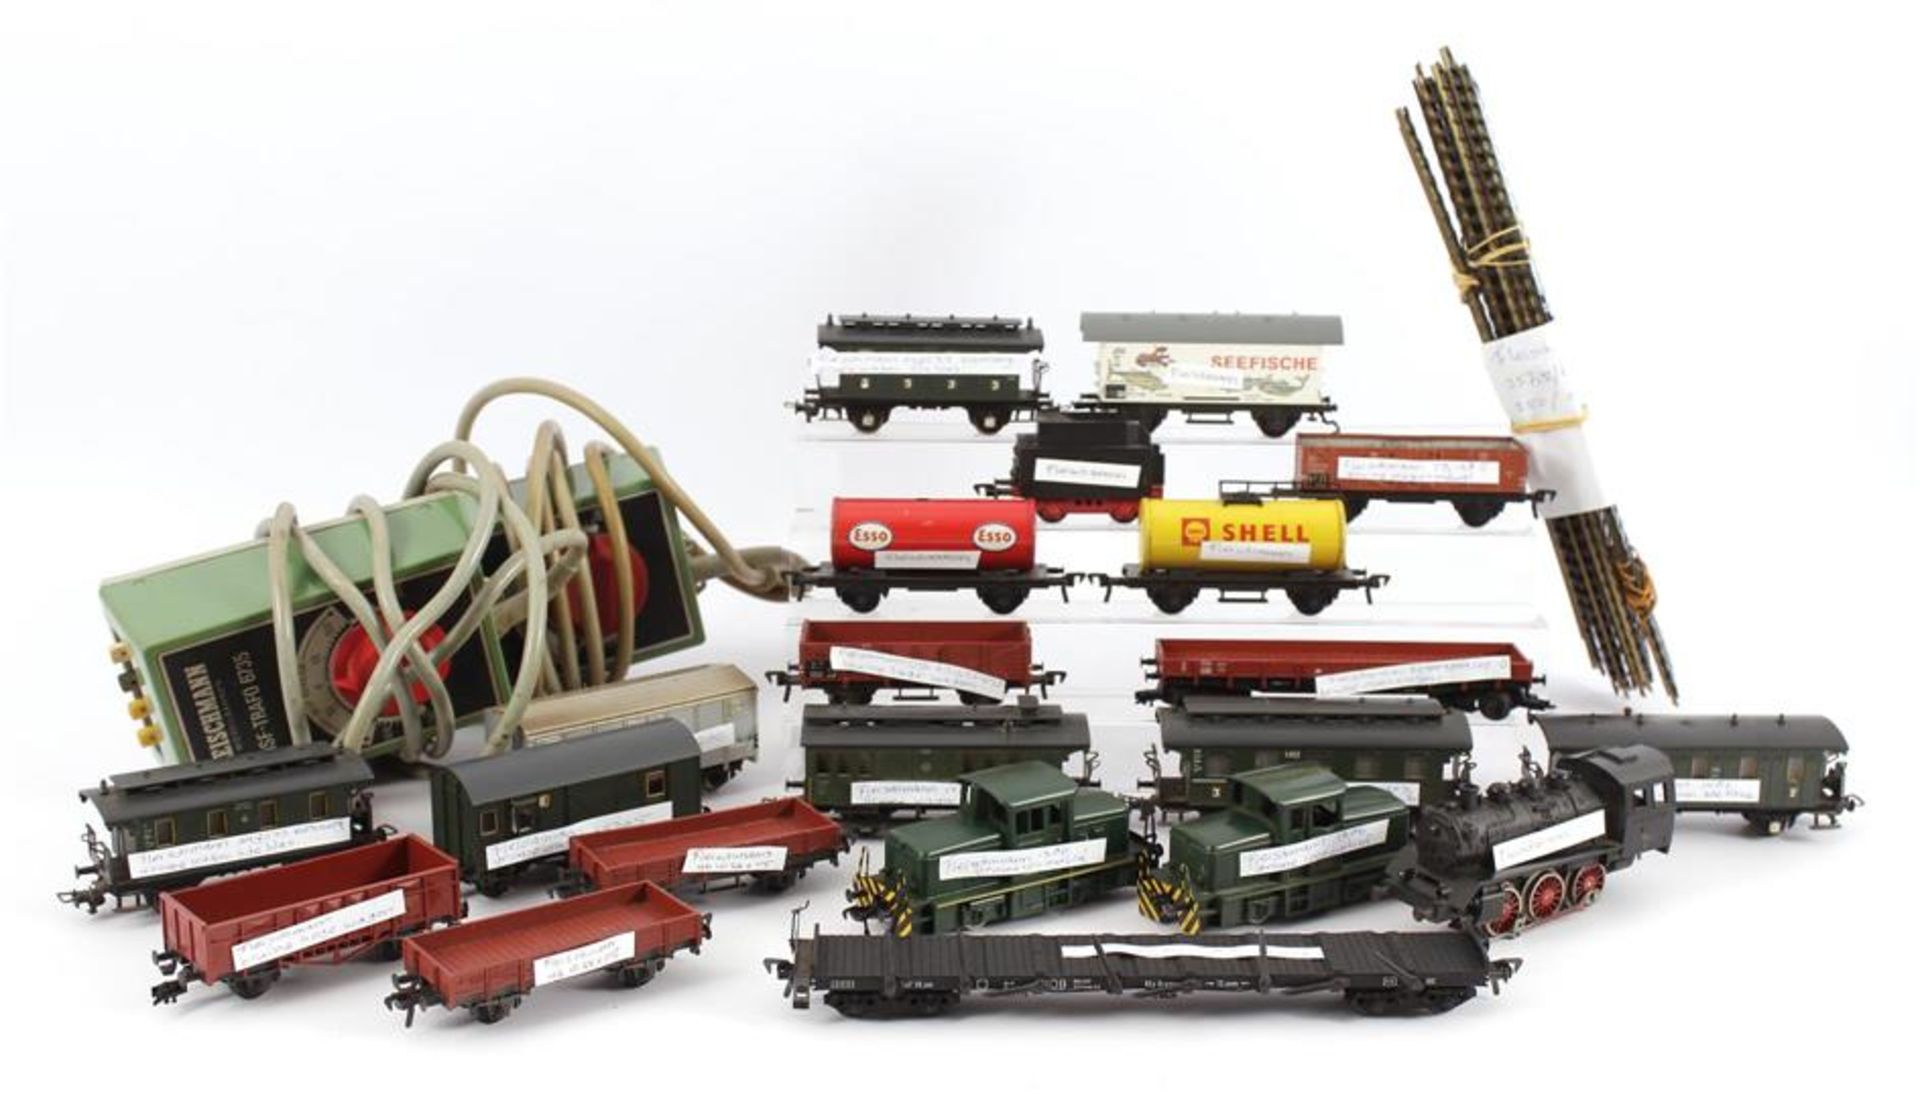 Lot with & nbsp; Fleischmann locomotive, wagons, rails etc, box with Hema train set and box with - Image 2 of 4